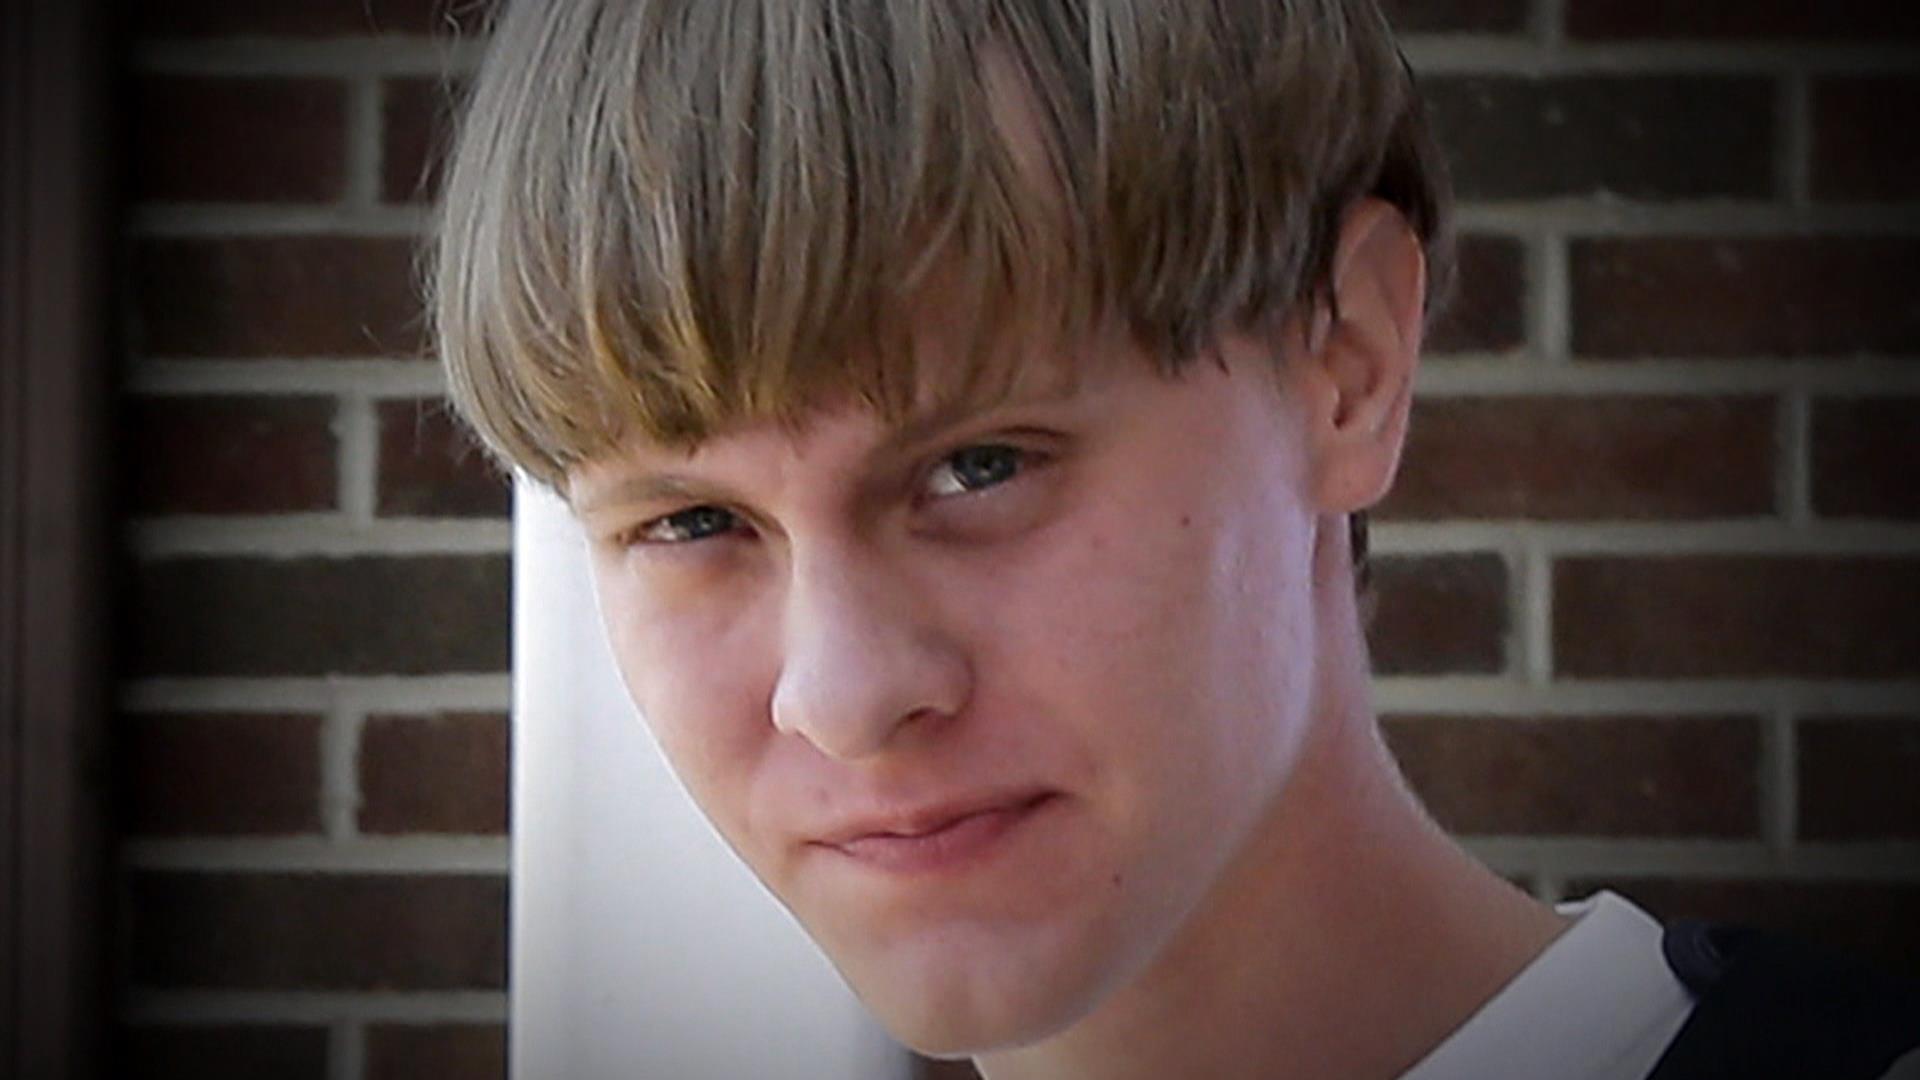 Dylann Roof jury sees video that appears to show him entering Charleston church